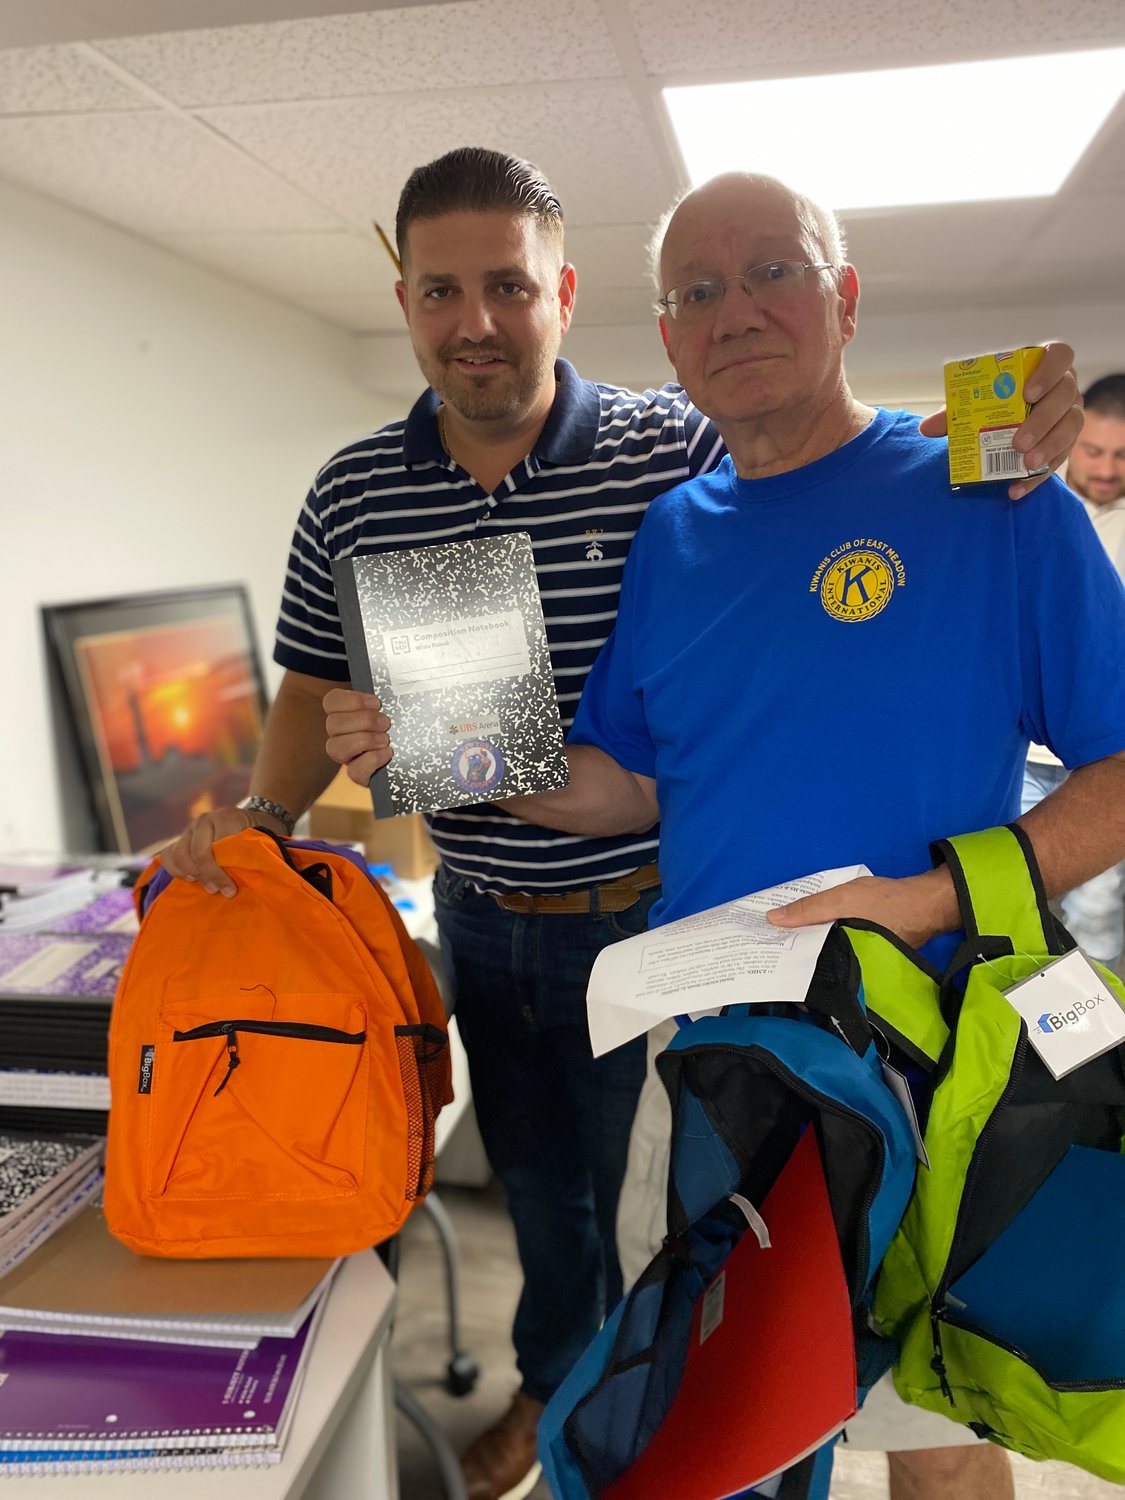 Richie Krug Jr., left, and Steve LaSala, teamed up to pack multiple backpacks at a time. 
The costs of back-to-school supplies has risen more than 25 percent over the past five years, meaning more students might have gone without.